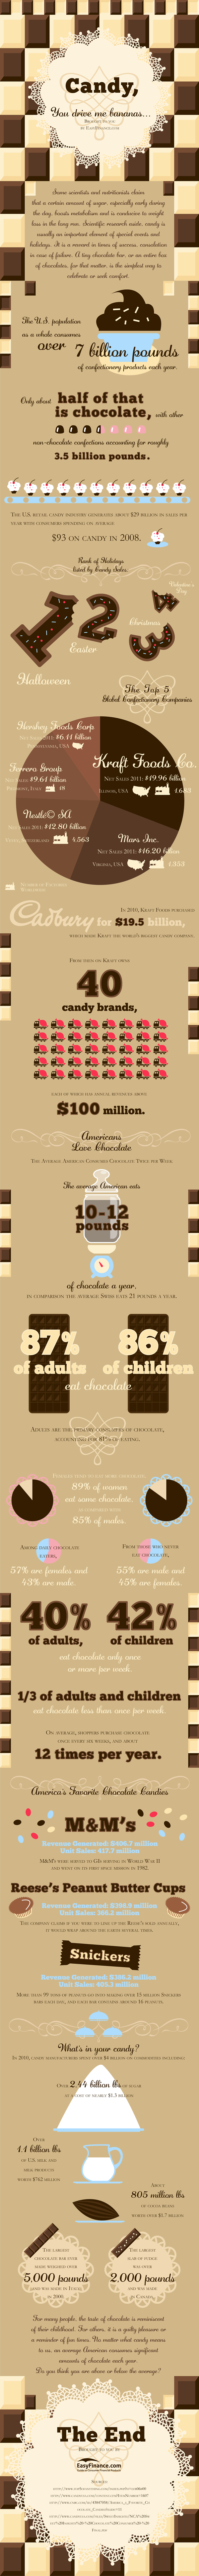 Candy, You Drive Me Bananas (Infographic)